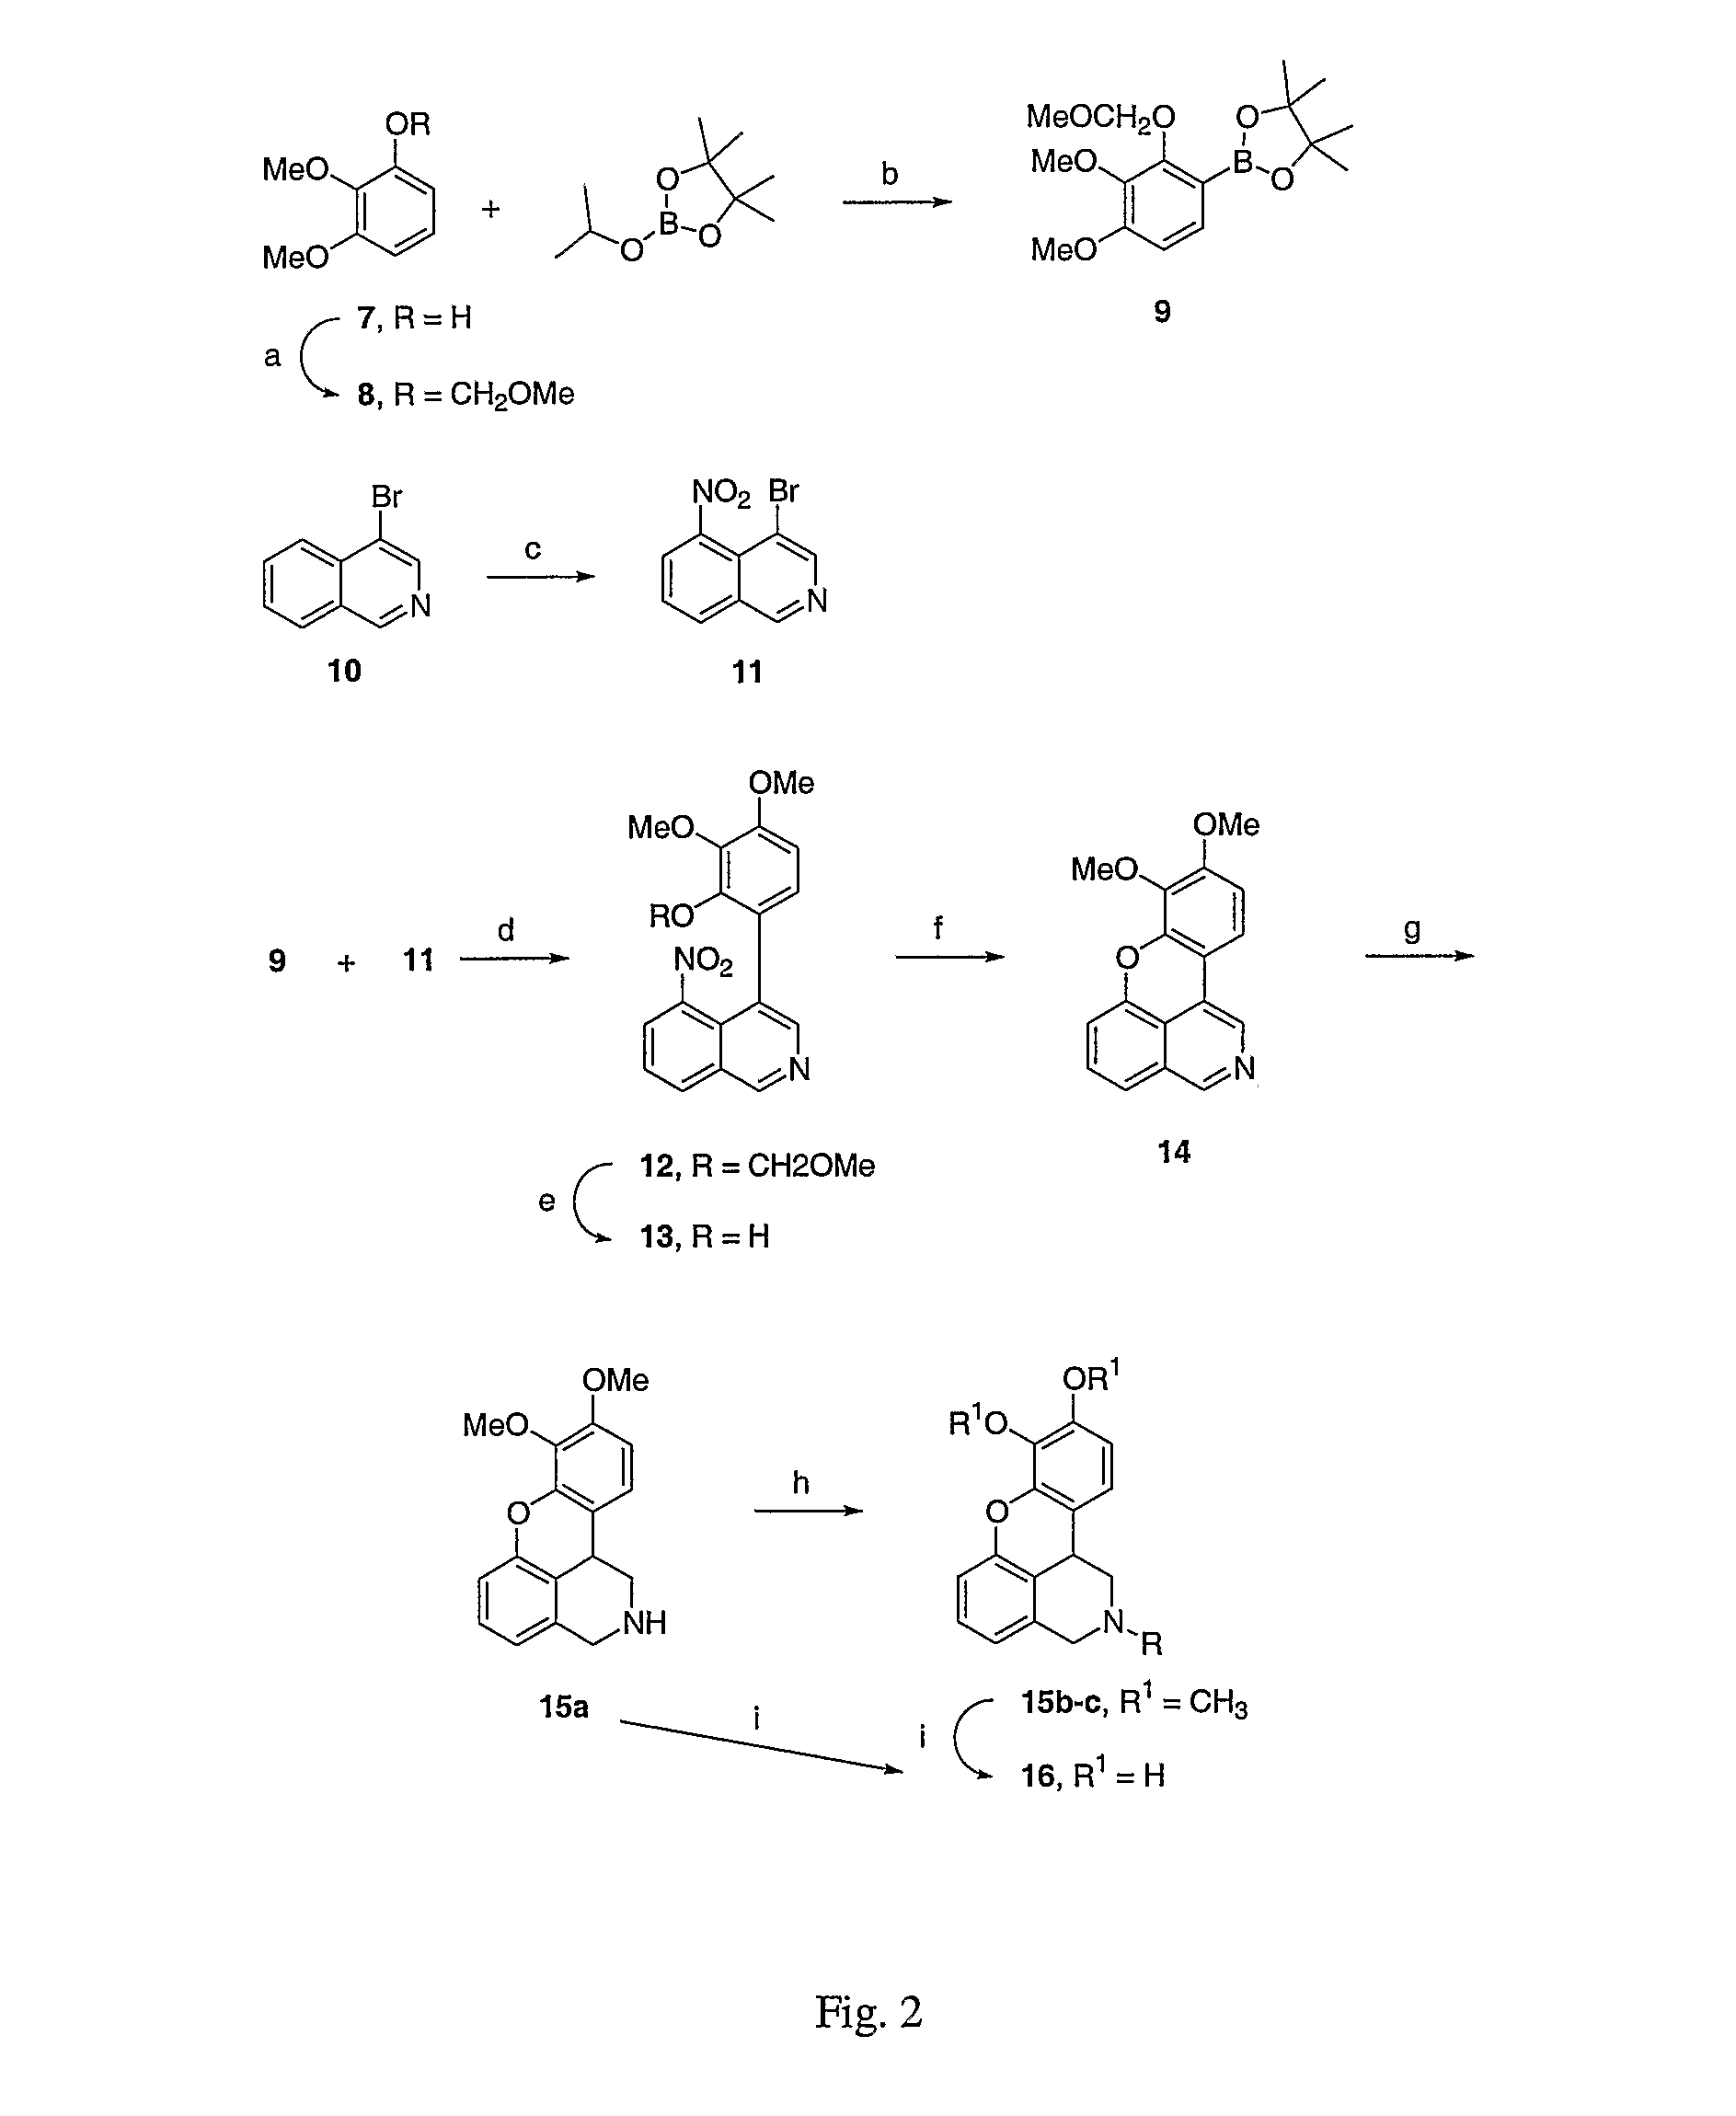 Co-administration of dopamine-receptor binding compounds